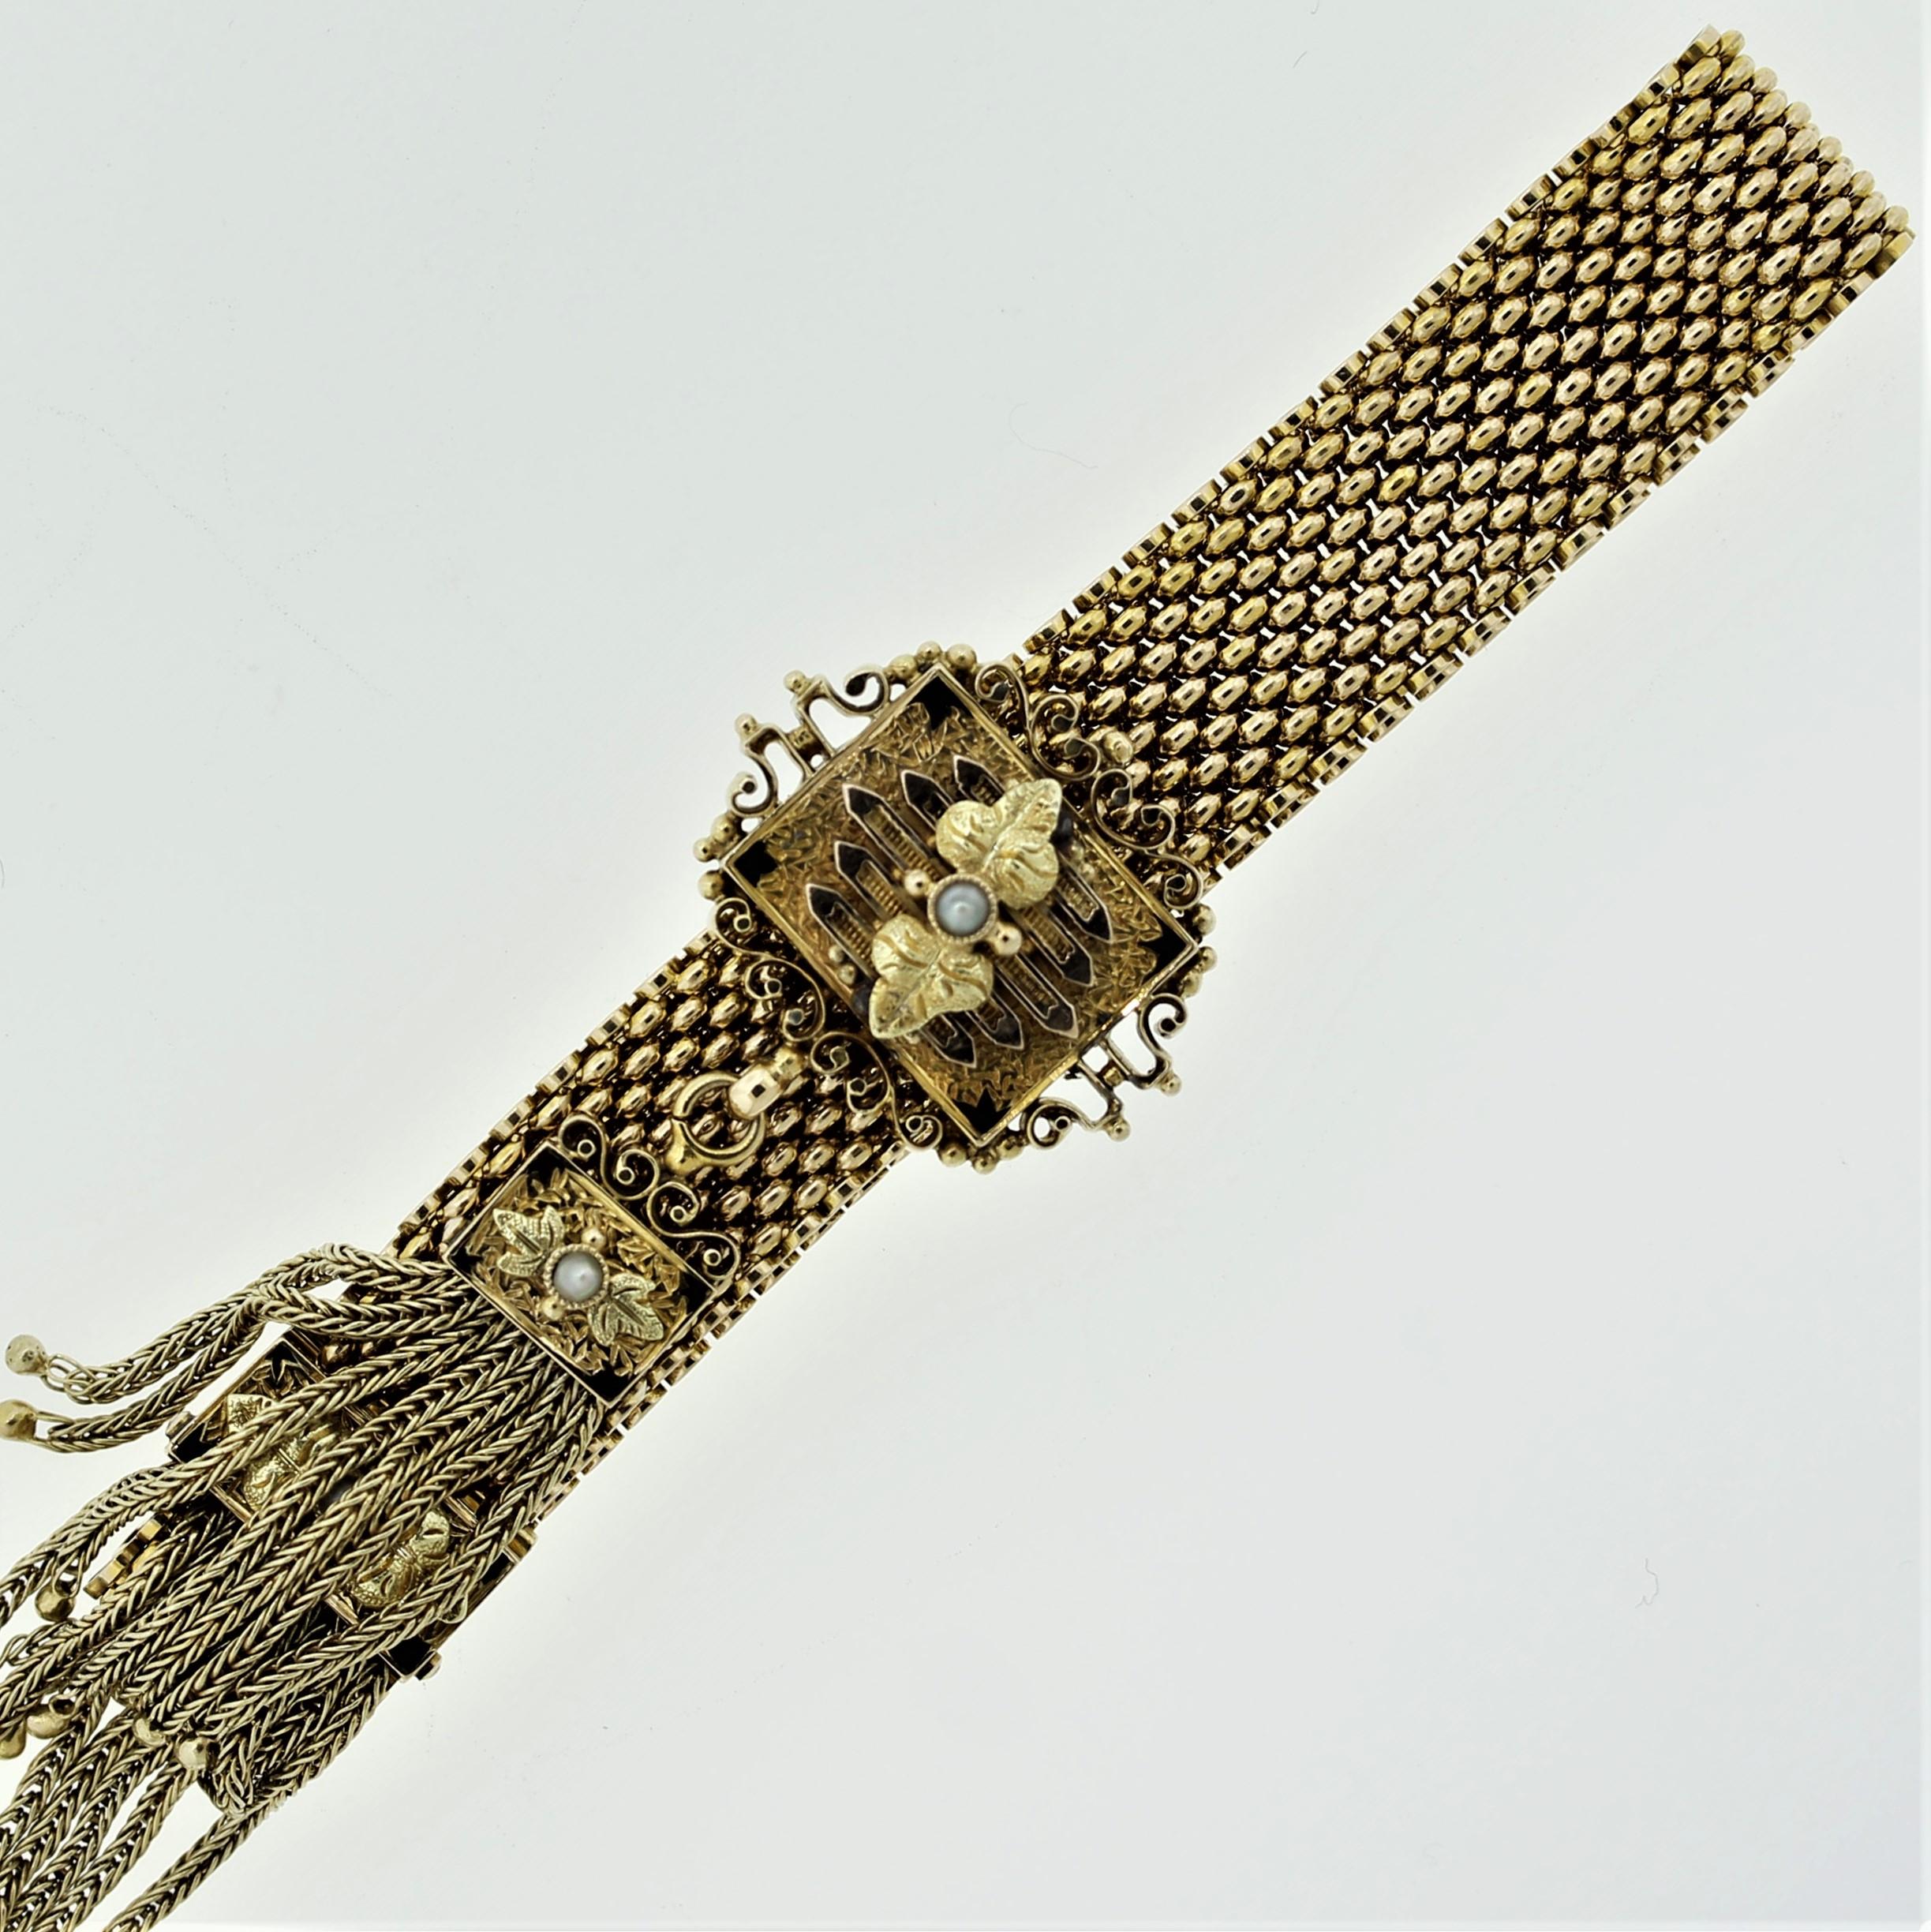 A beautiful antique bracelet, circa early 1900’s. It features fine hand-worked gold carvings on the slide as well as gold braided tassels on its ends. It is dotted with 3 natural pearls and accented with black enamel accents. Made in 14k yellow gold